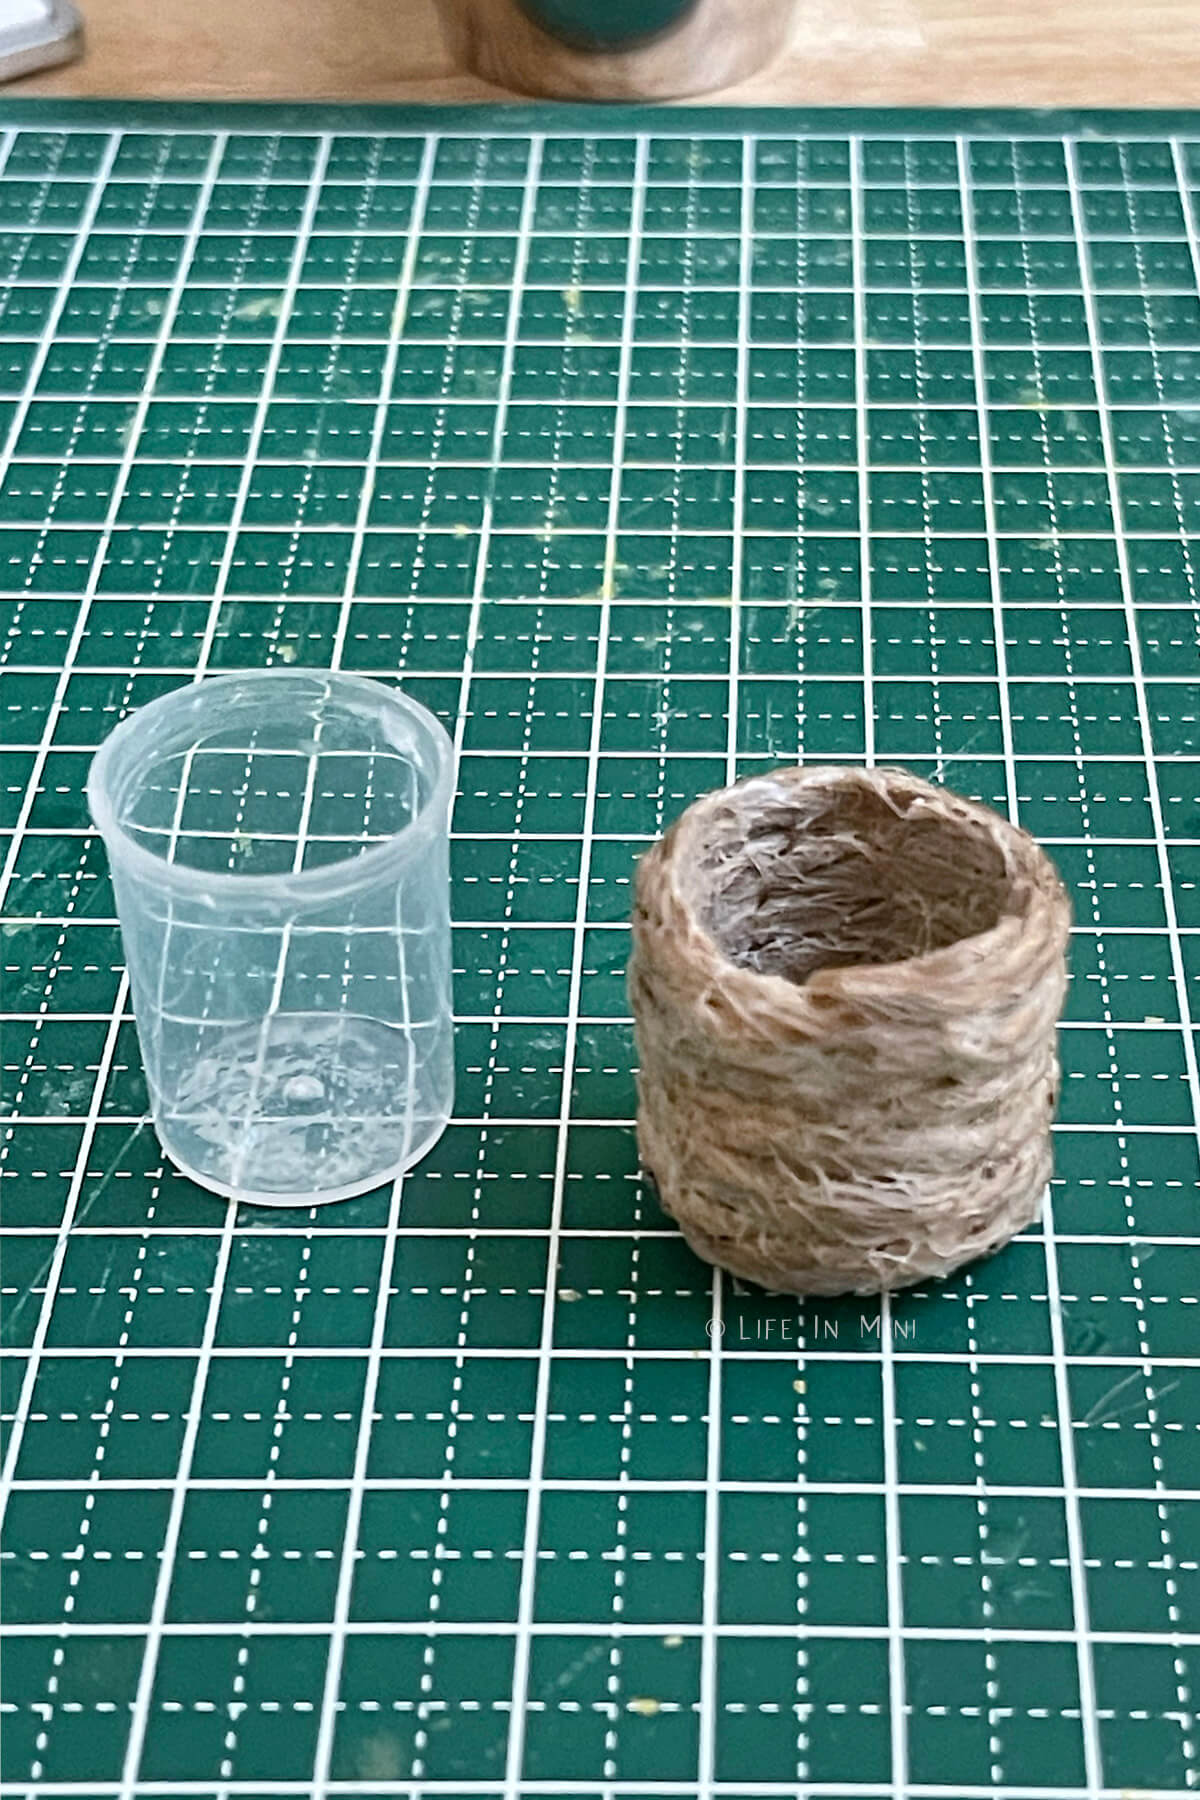 A small plastic cap with a mini basket made from twine and glue next to it